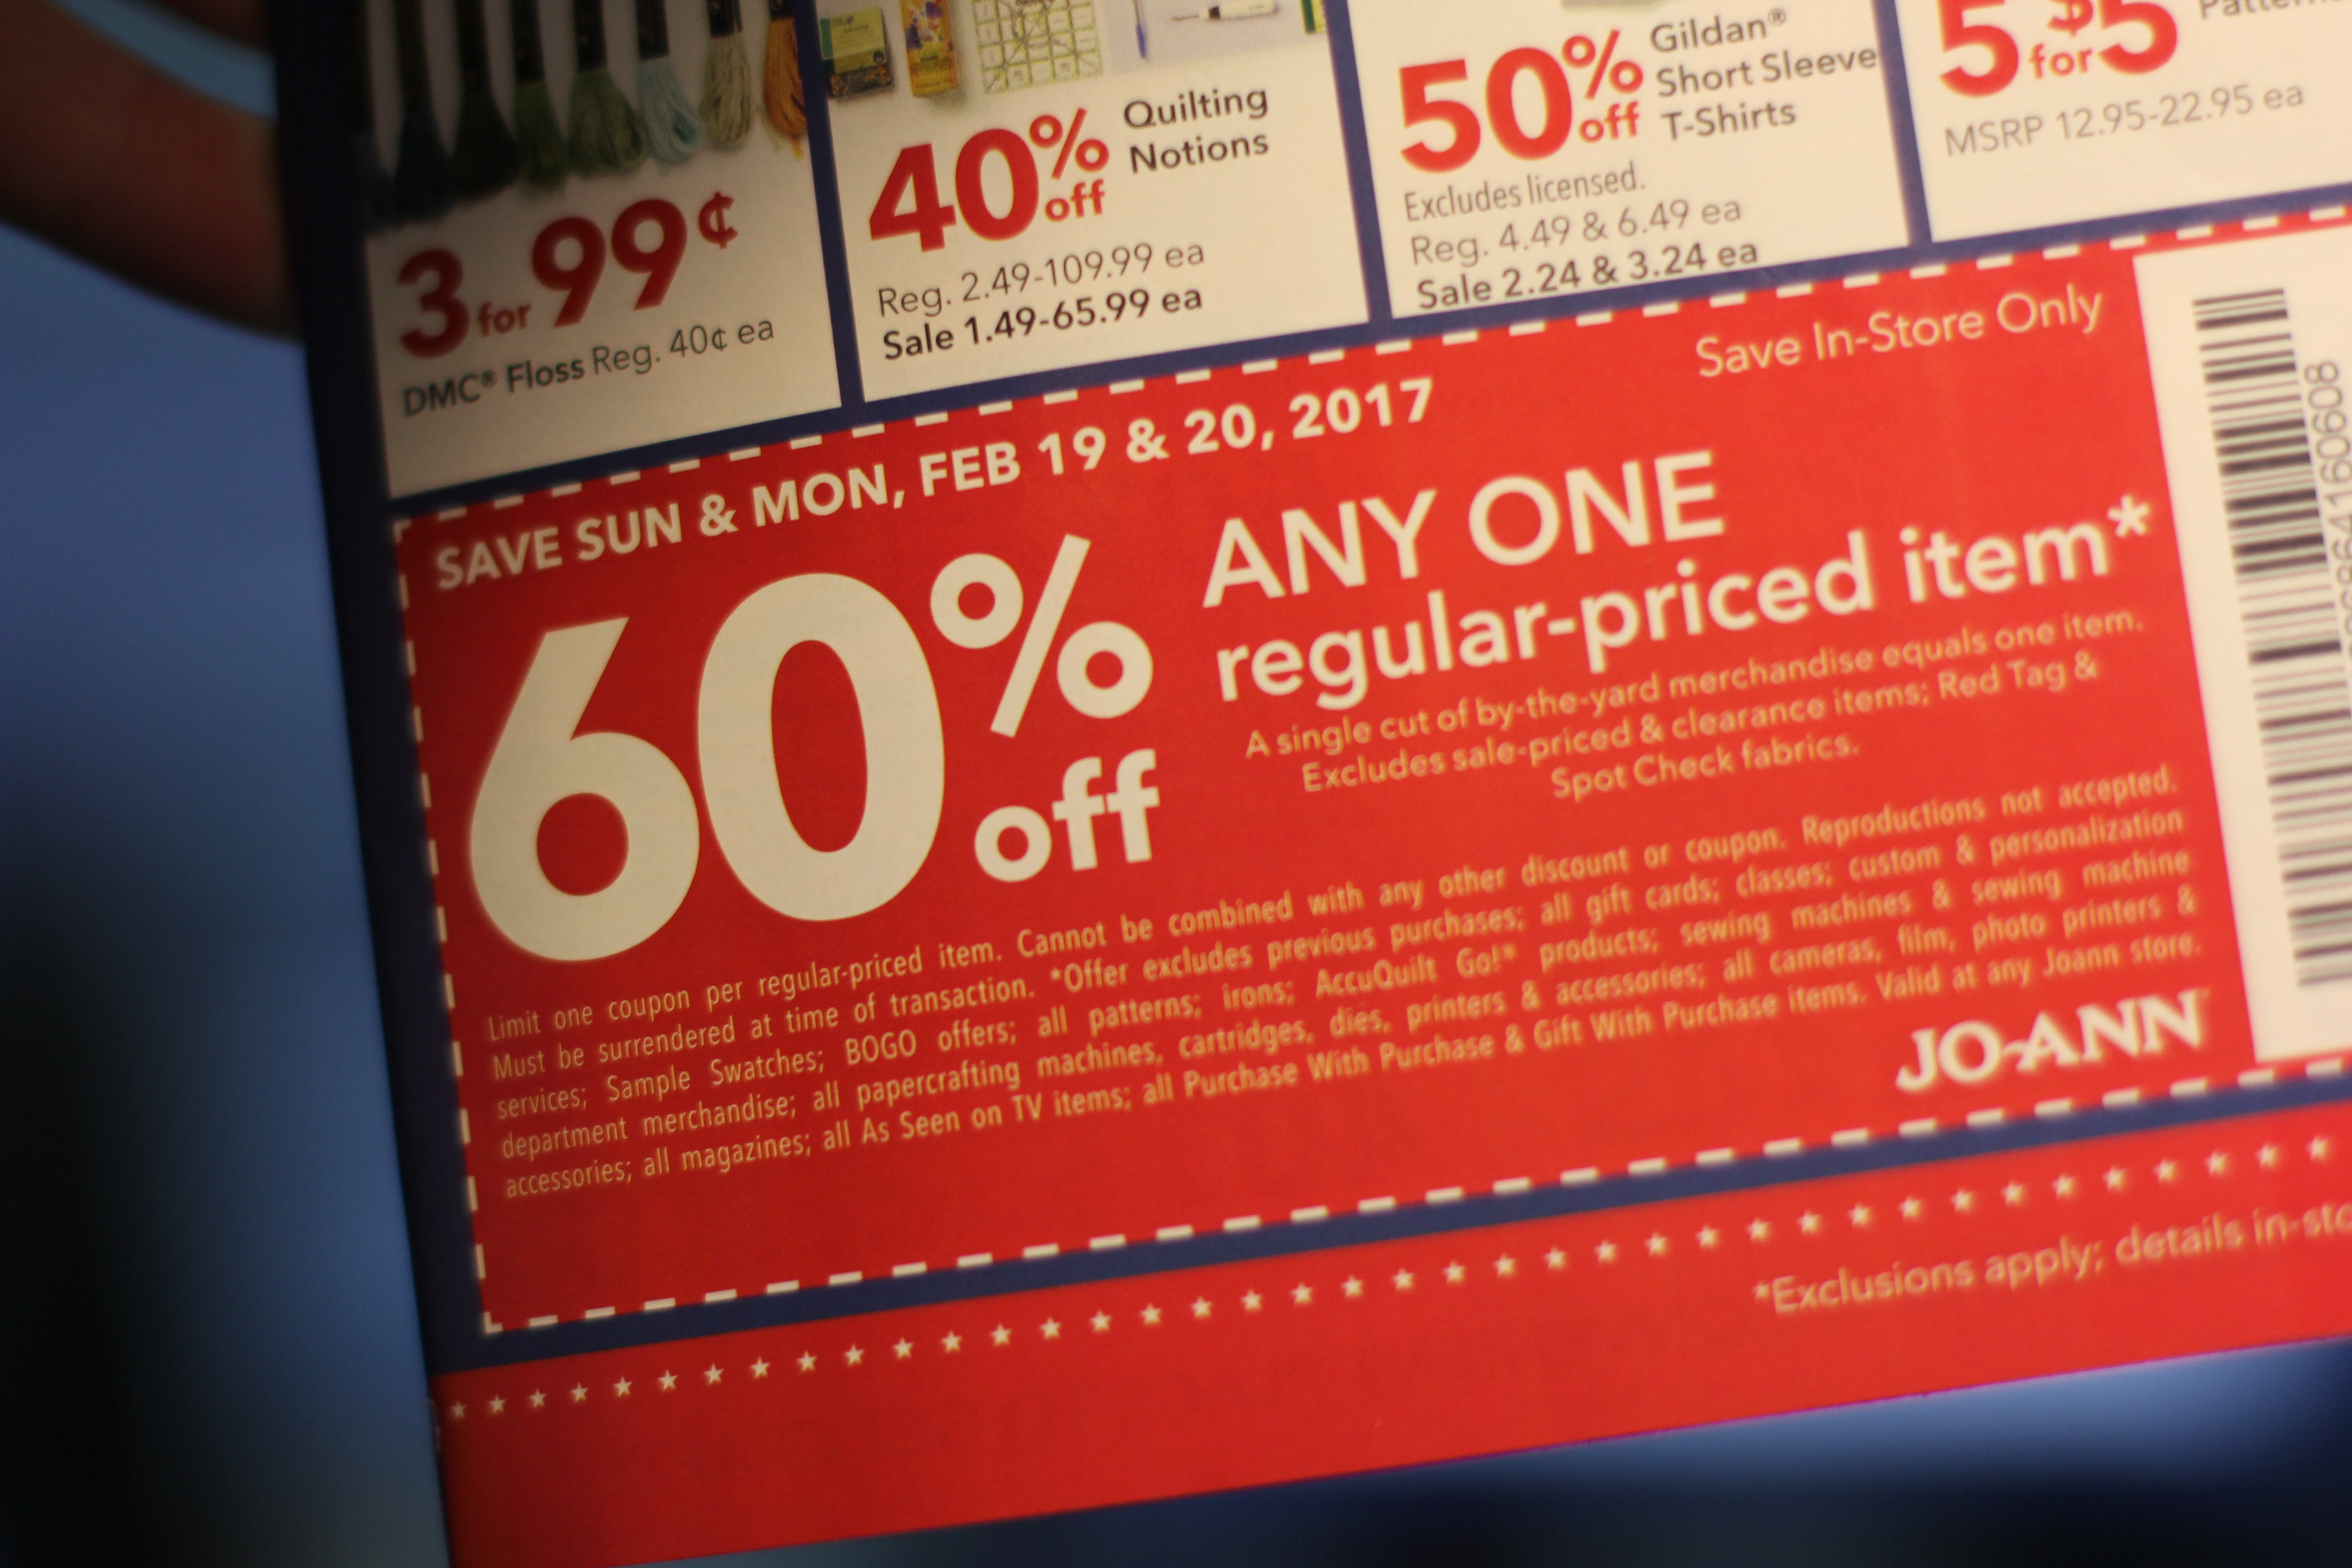 joann-coupon-guide-getting-more-savings-discounts-60-off-coupon-www